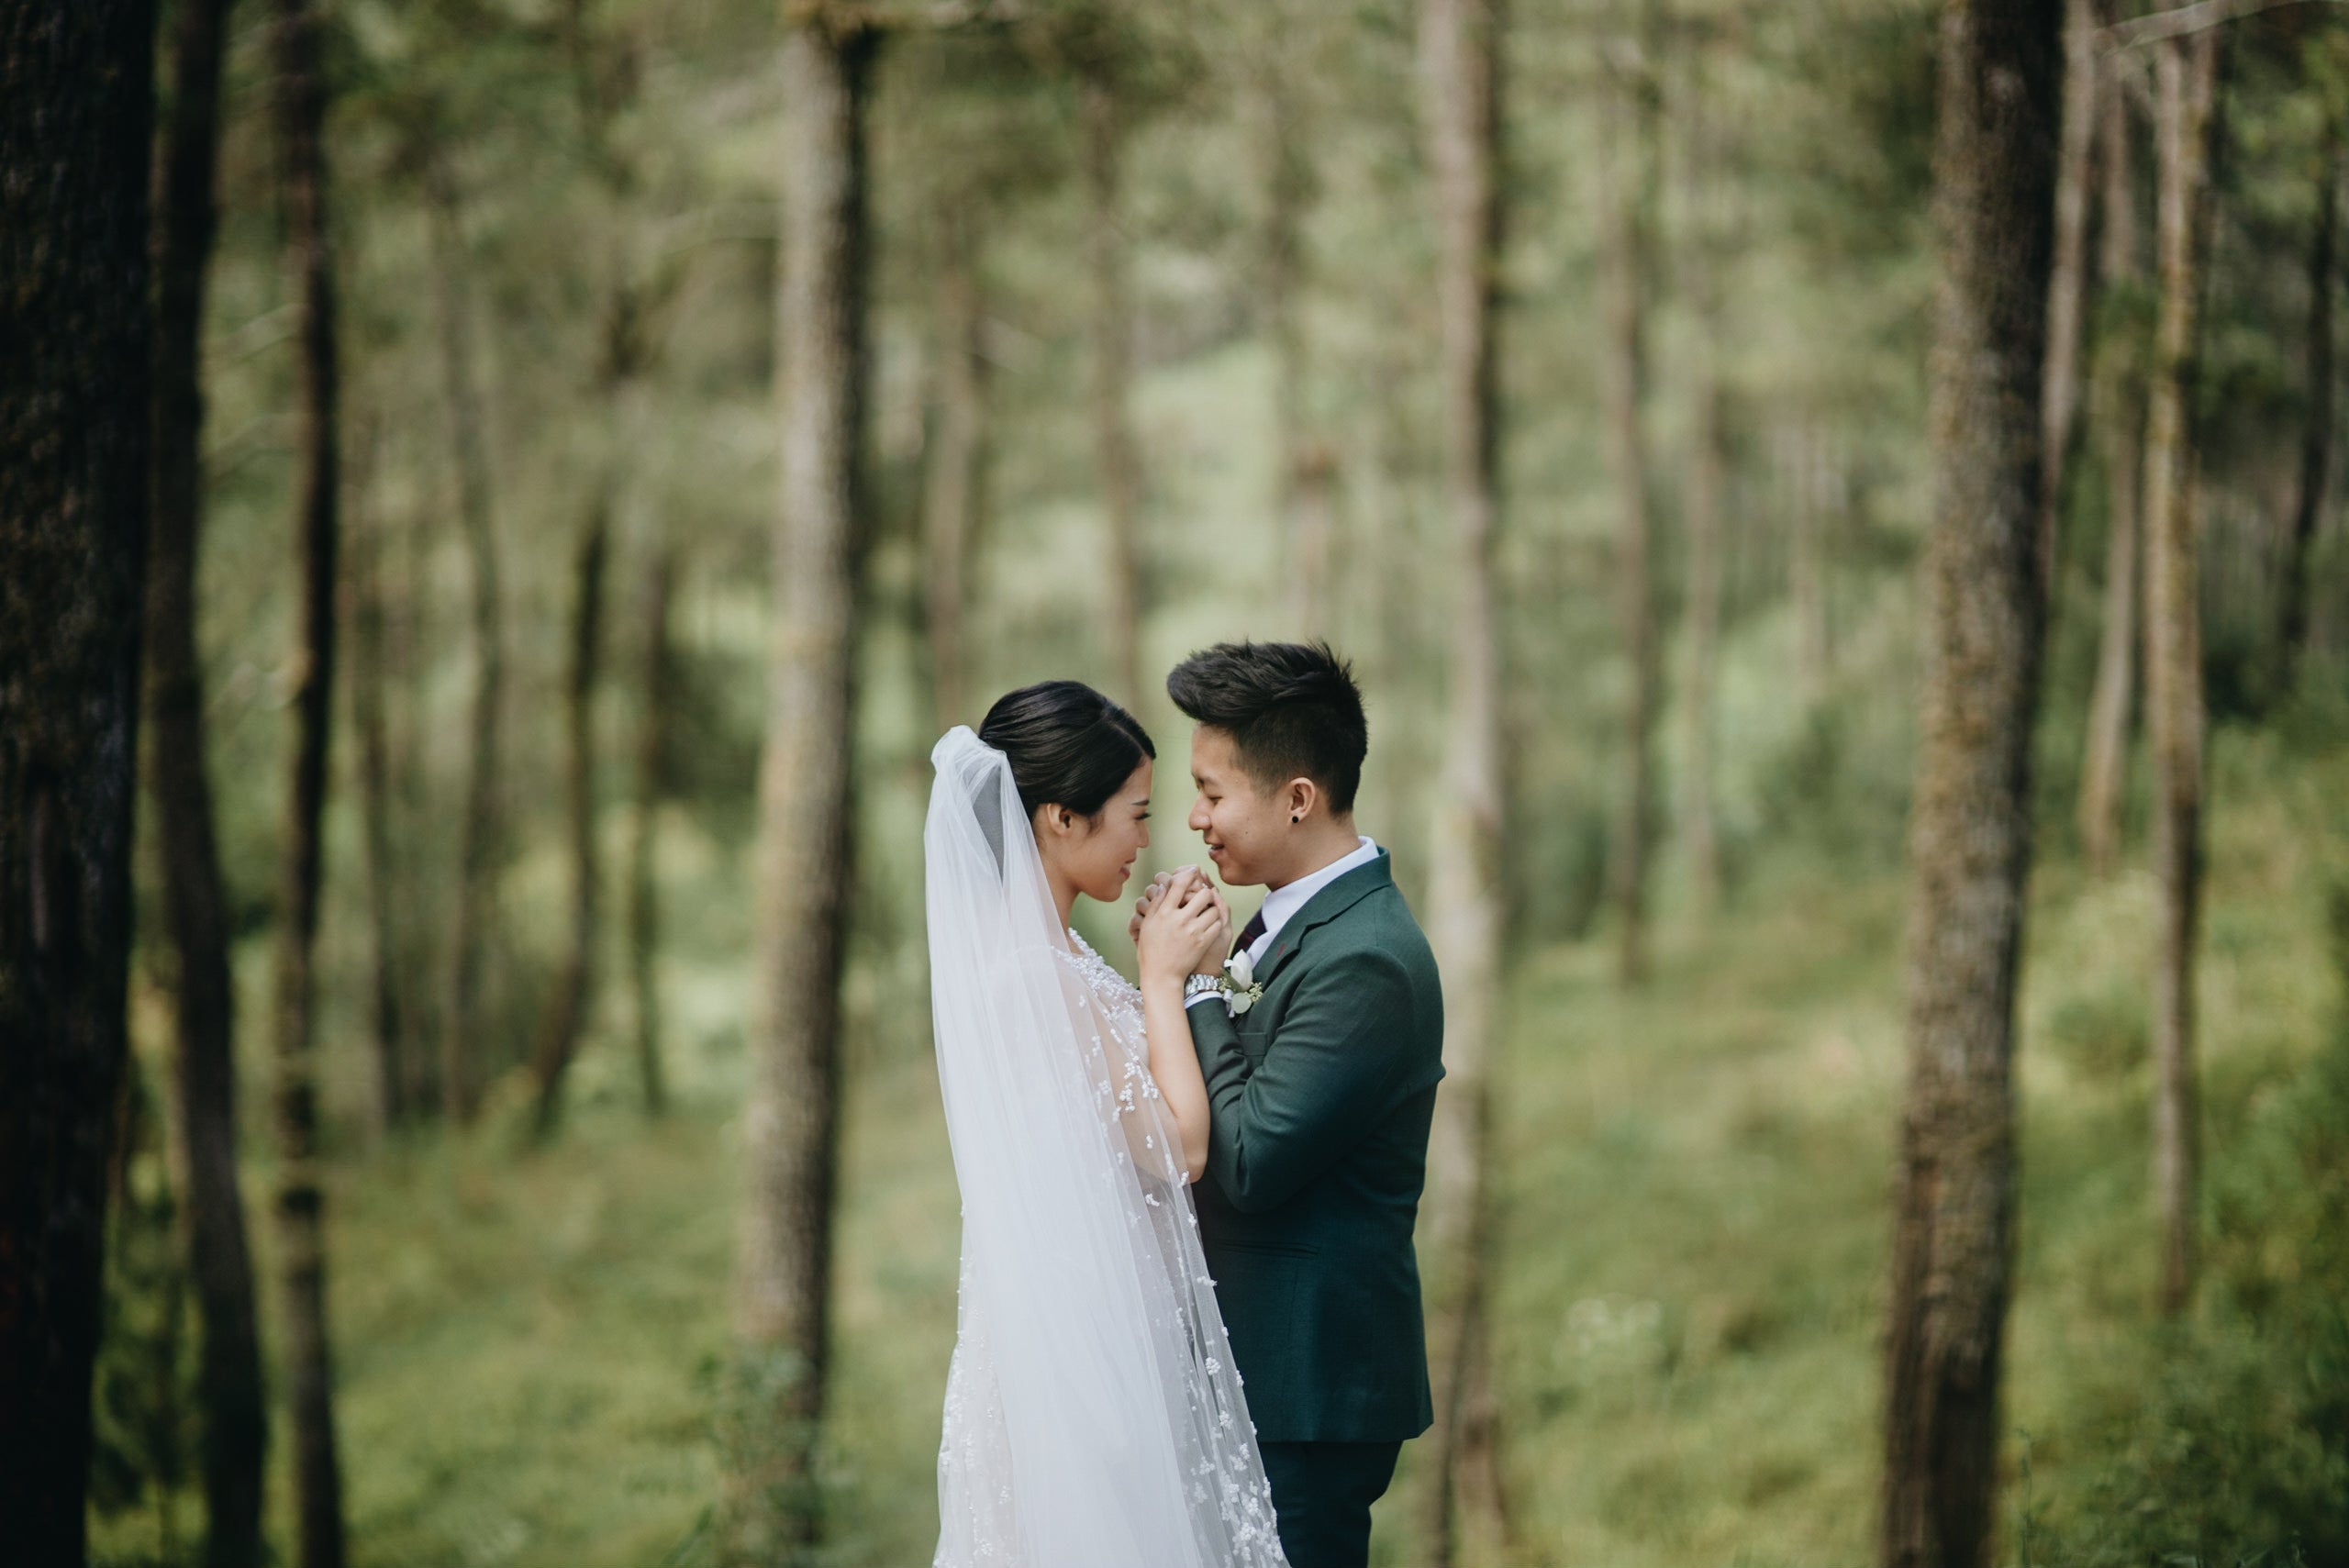 Top 5 Wedding Suit Inspirations For 2020 - Assemble Singapore